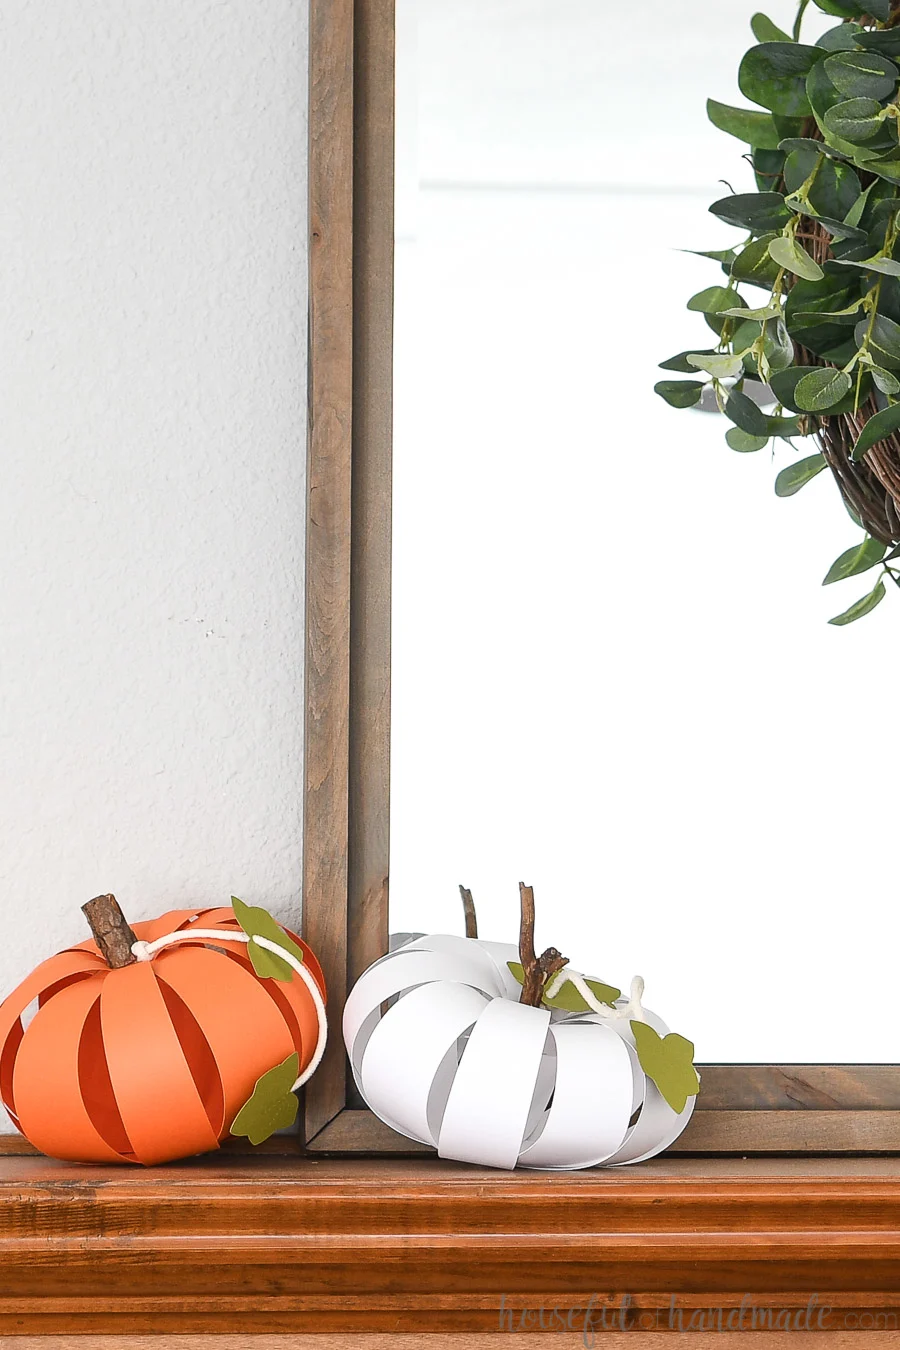 White and orange paper pumpkins on the mantel in front of a gray framed mirror.